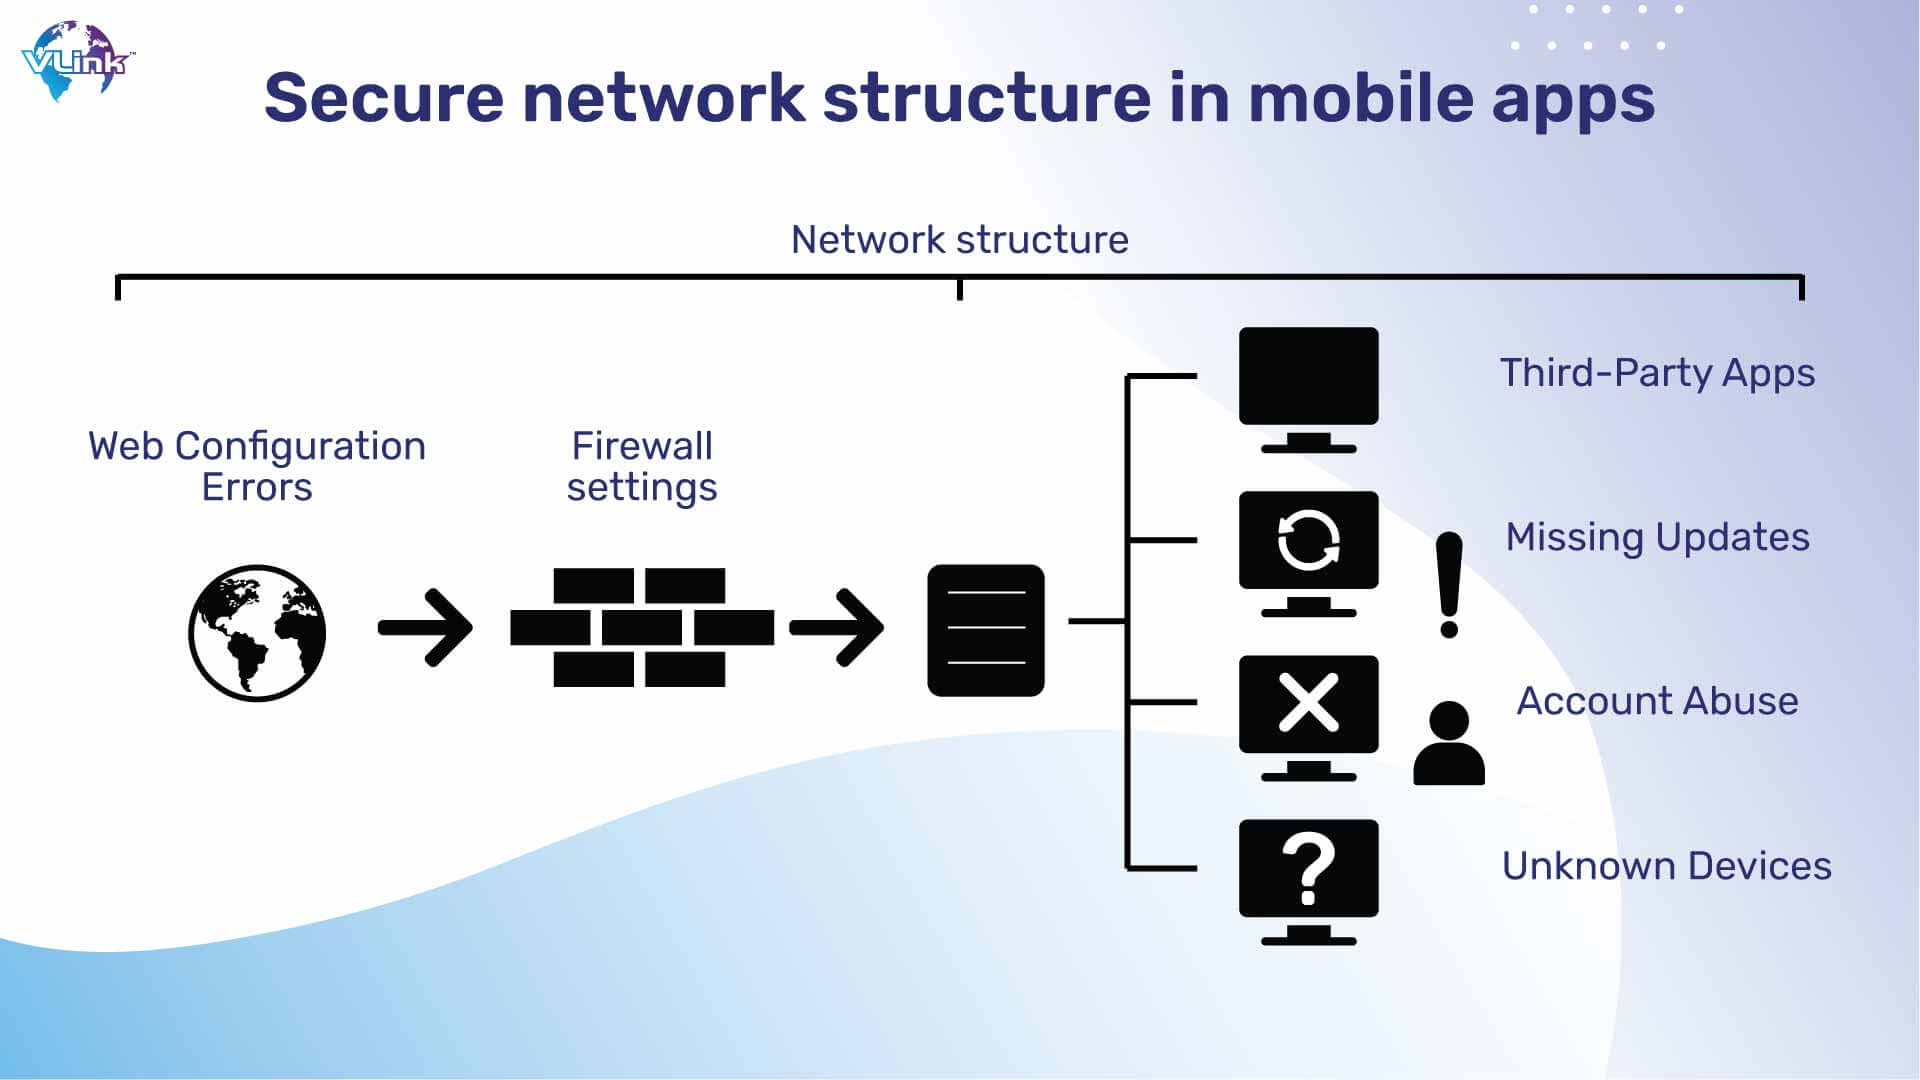 Securenetwork structure in mobile apps